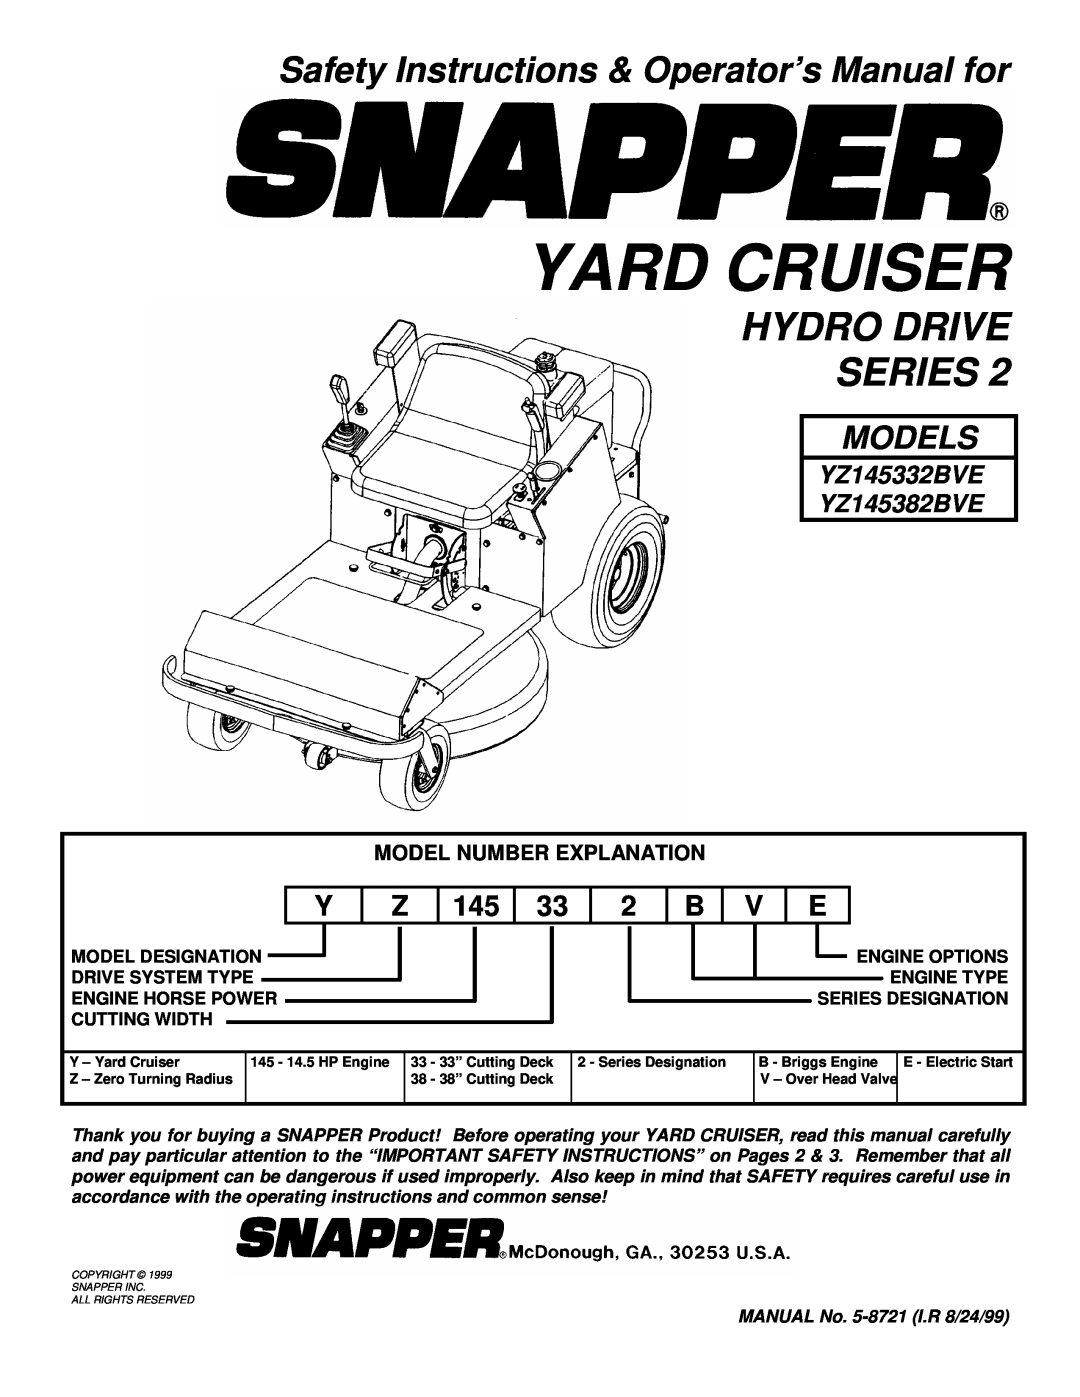 Snapper YZ145332BVE, YZ145382BVE important safety instructions Hydro Drive Series, Models, Model Number Explanation 